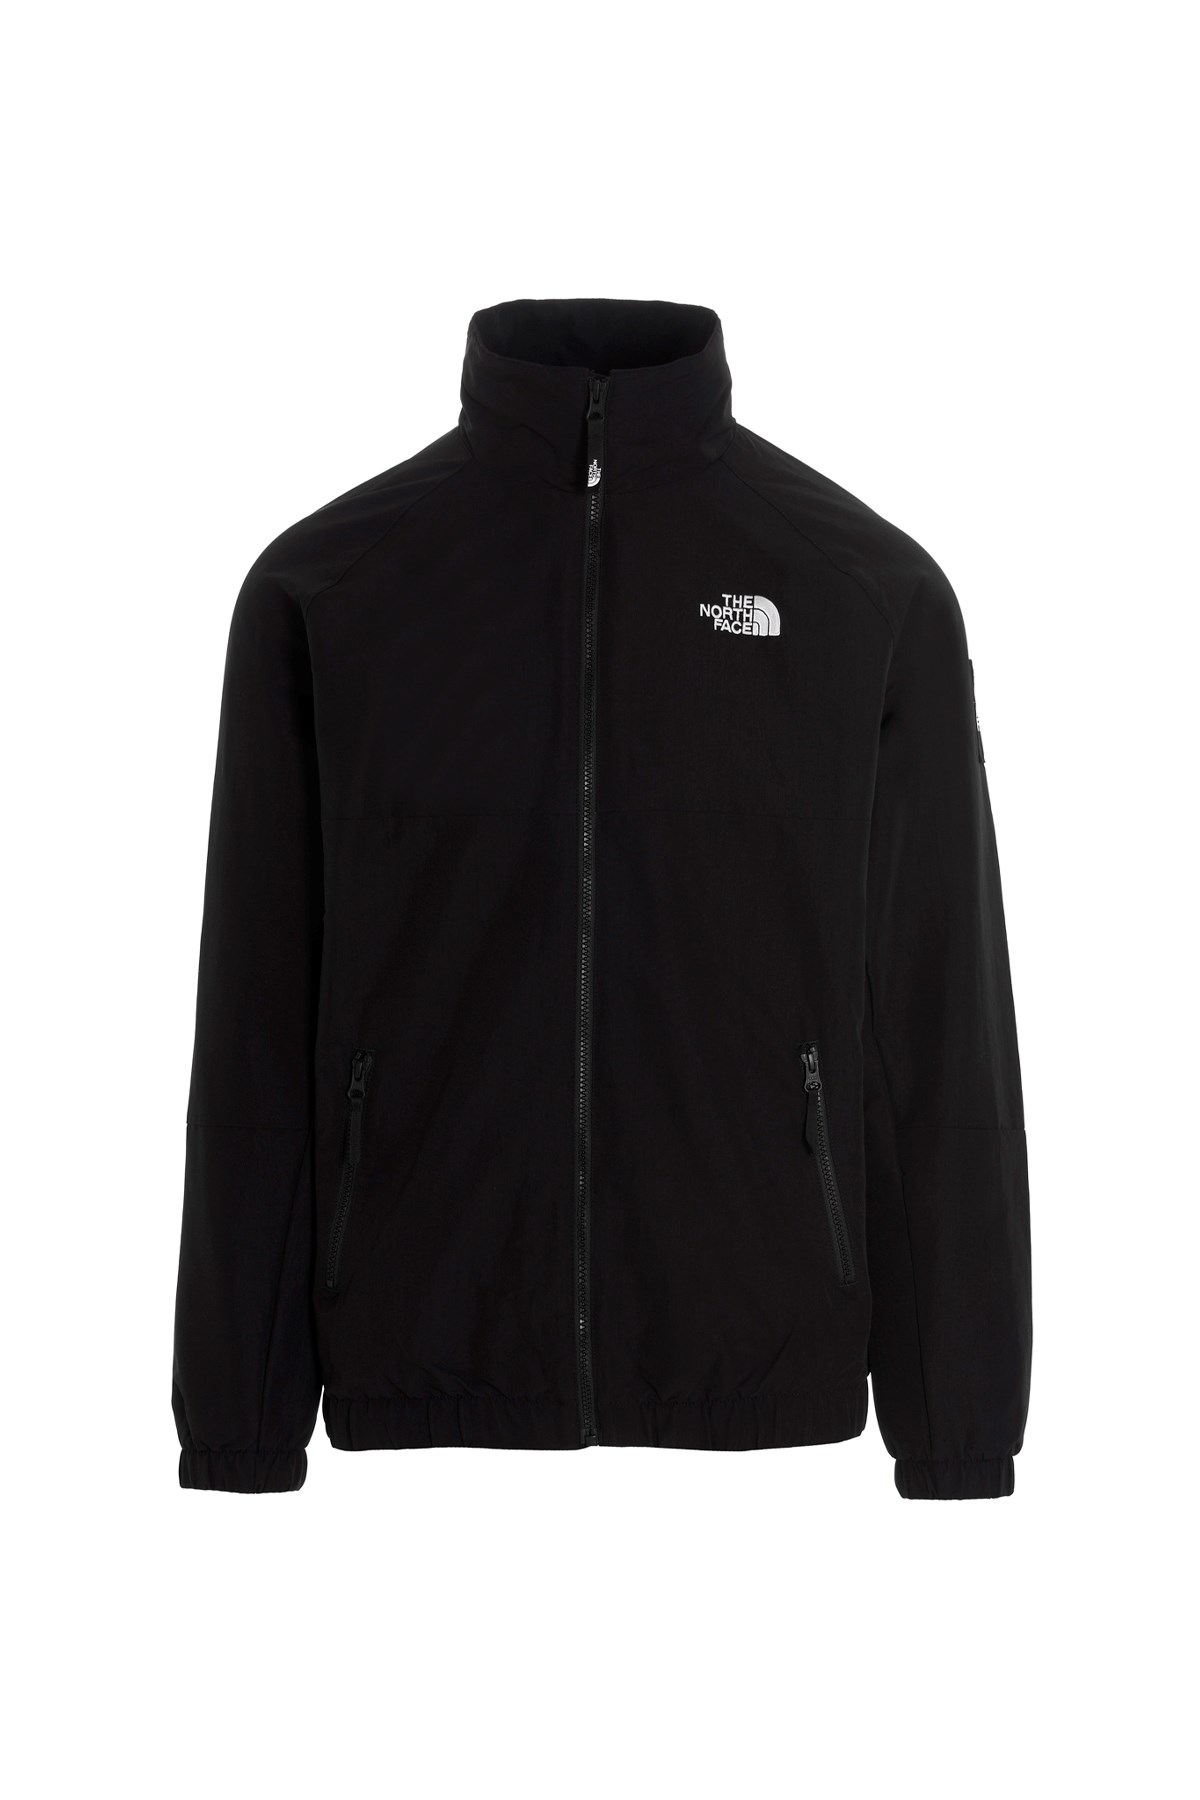 THE NORTH FACE Black Box Capsule Track Jacket